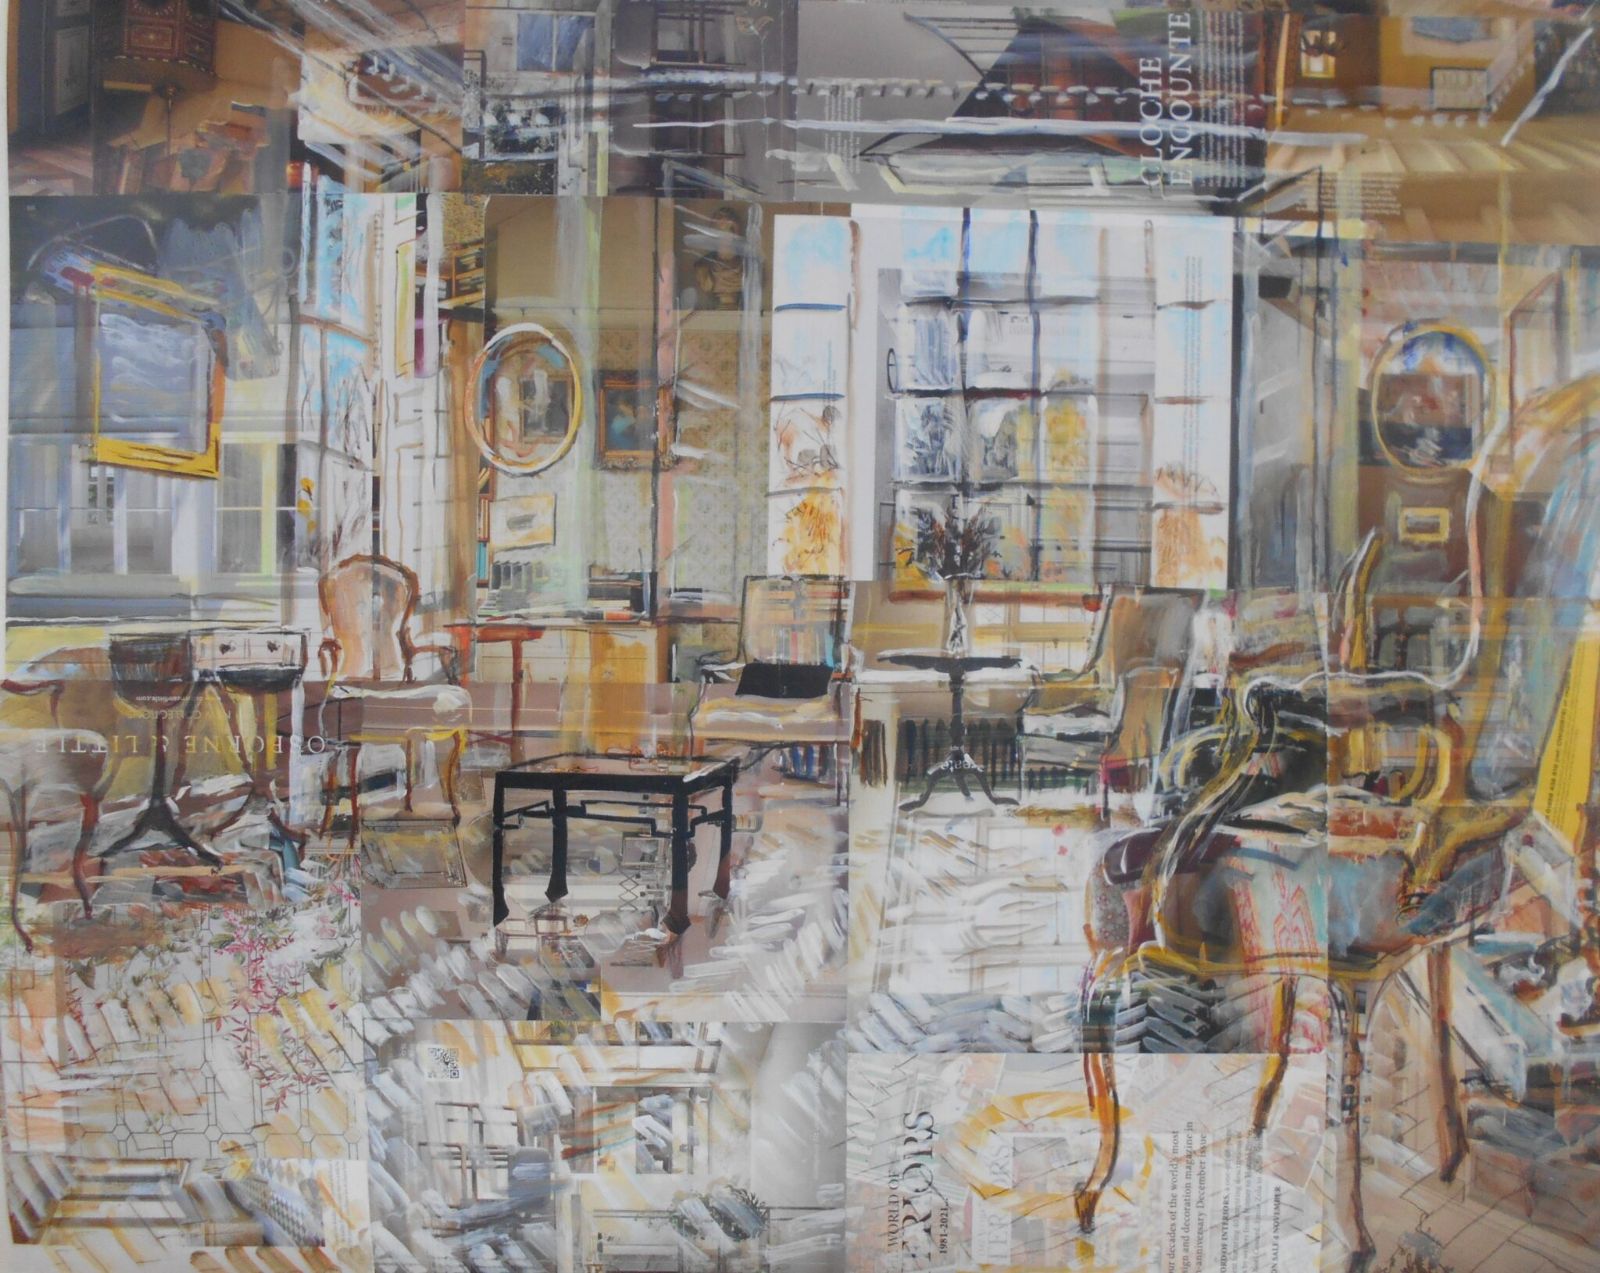 West Horsley Place, Morning Room  (cloche encounter) by Alison Pullen